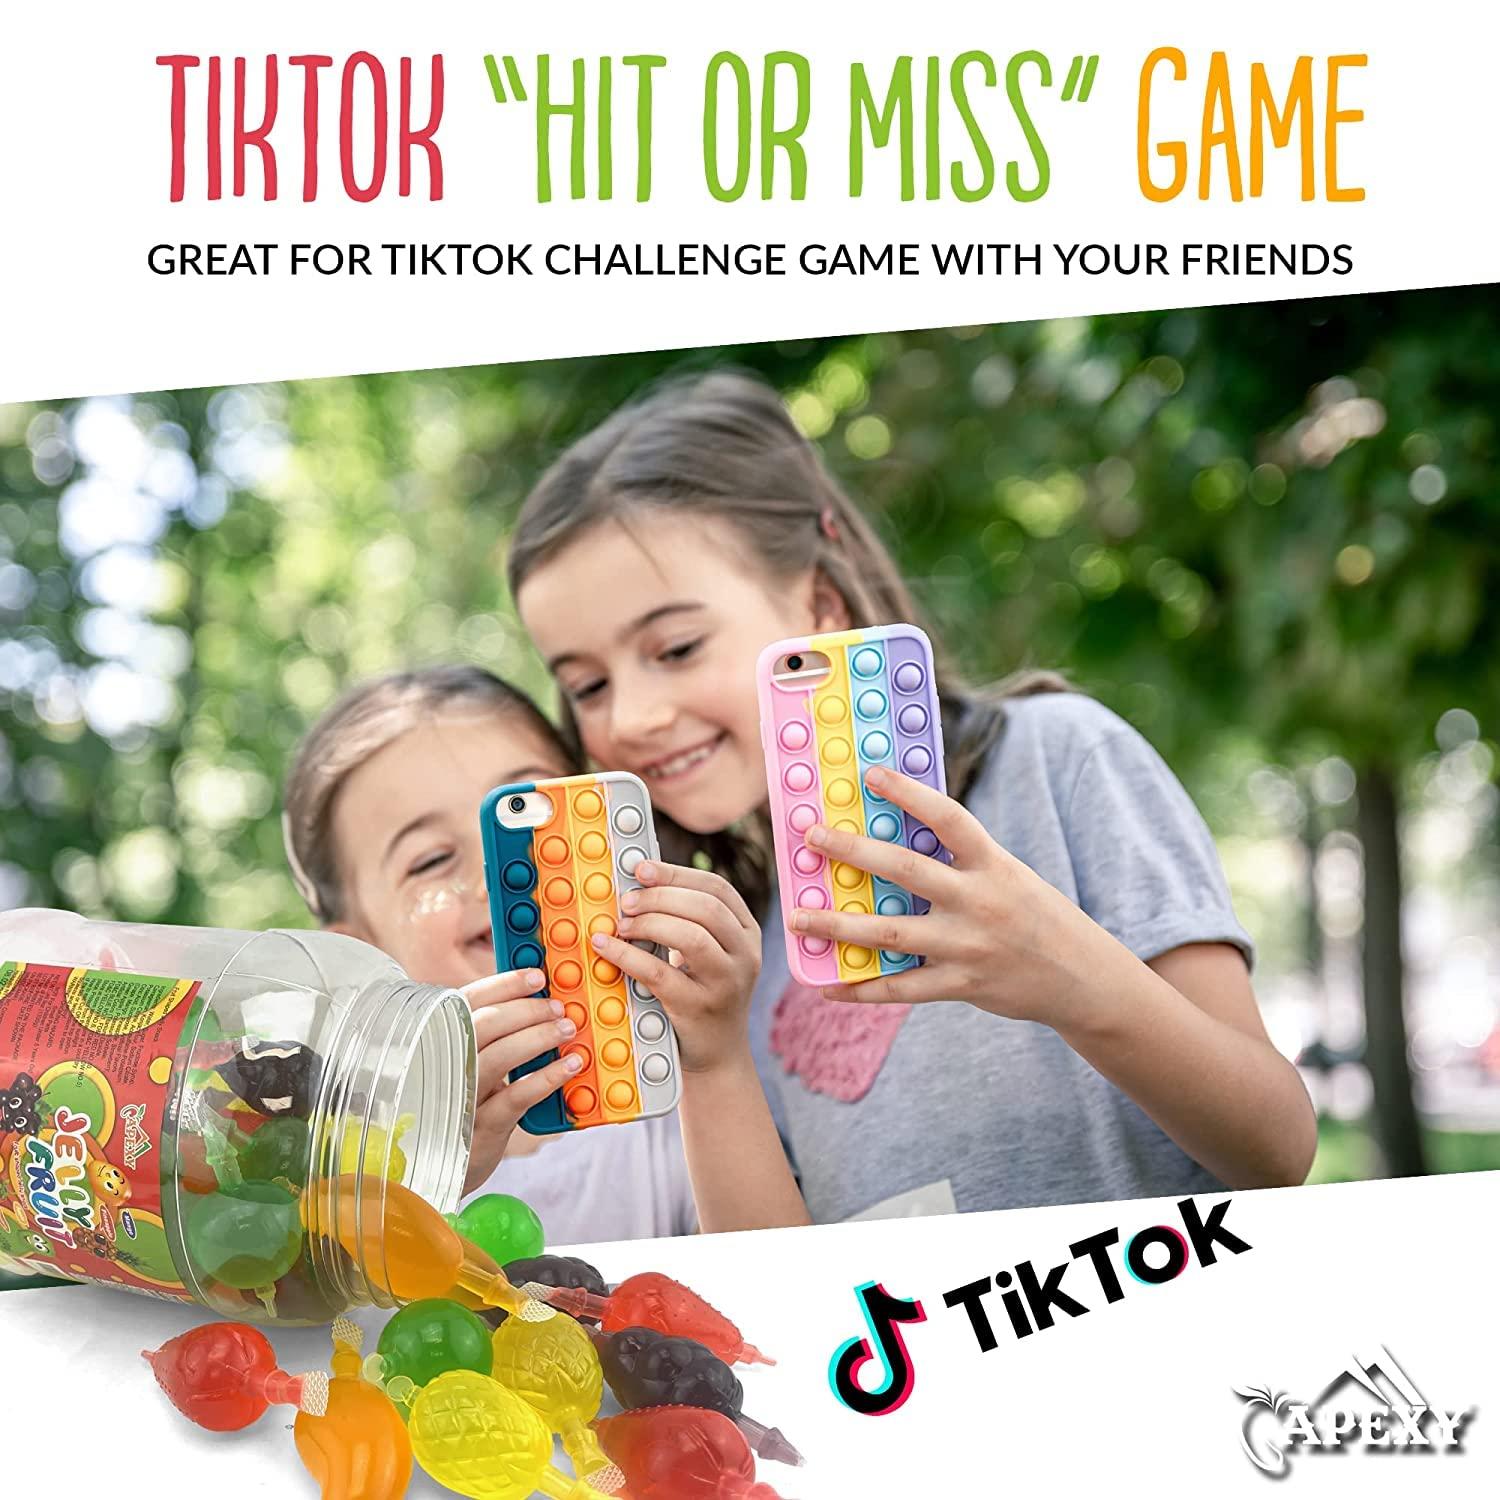 Fruit Jelly Snack Tik Tok Challenge Hit or Miss - Fruit-Shaped